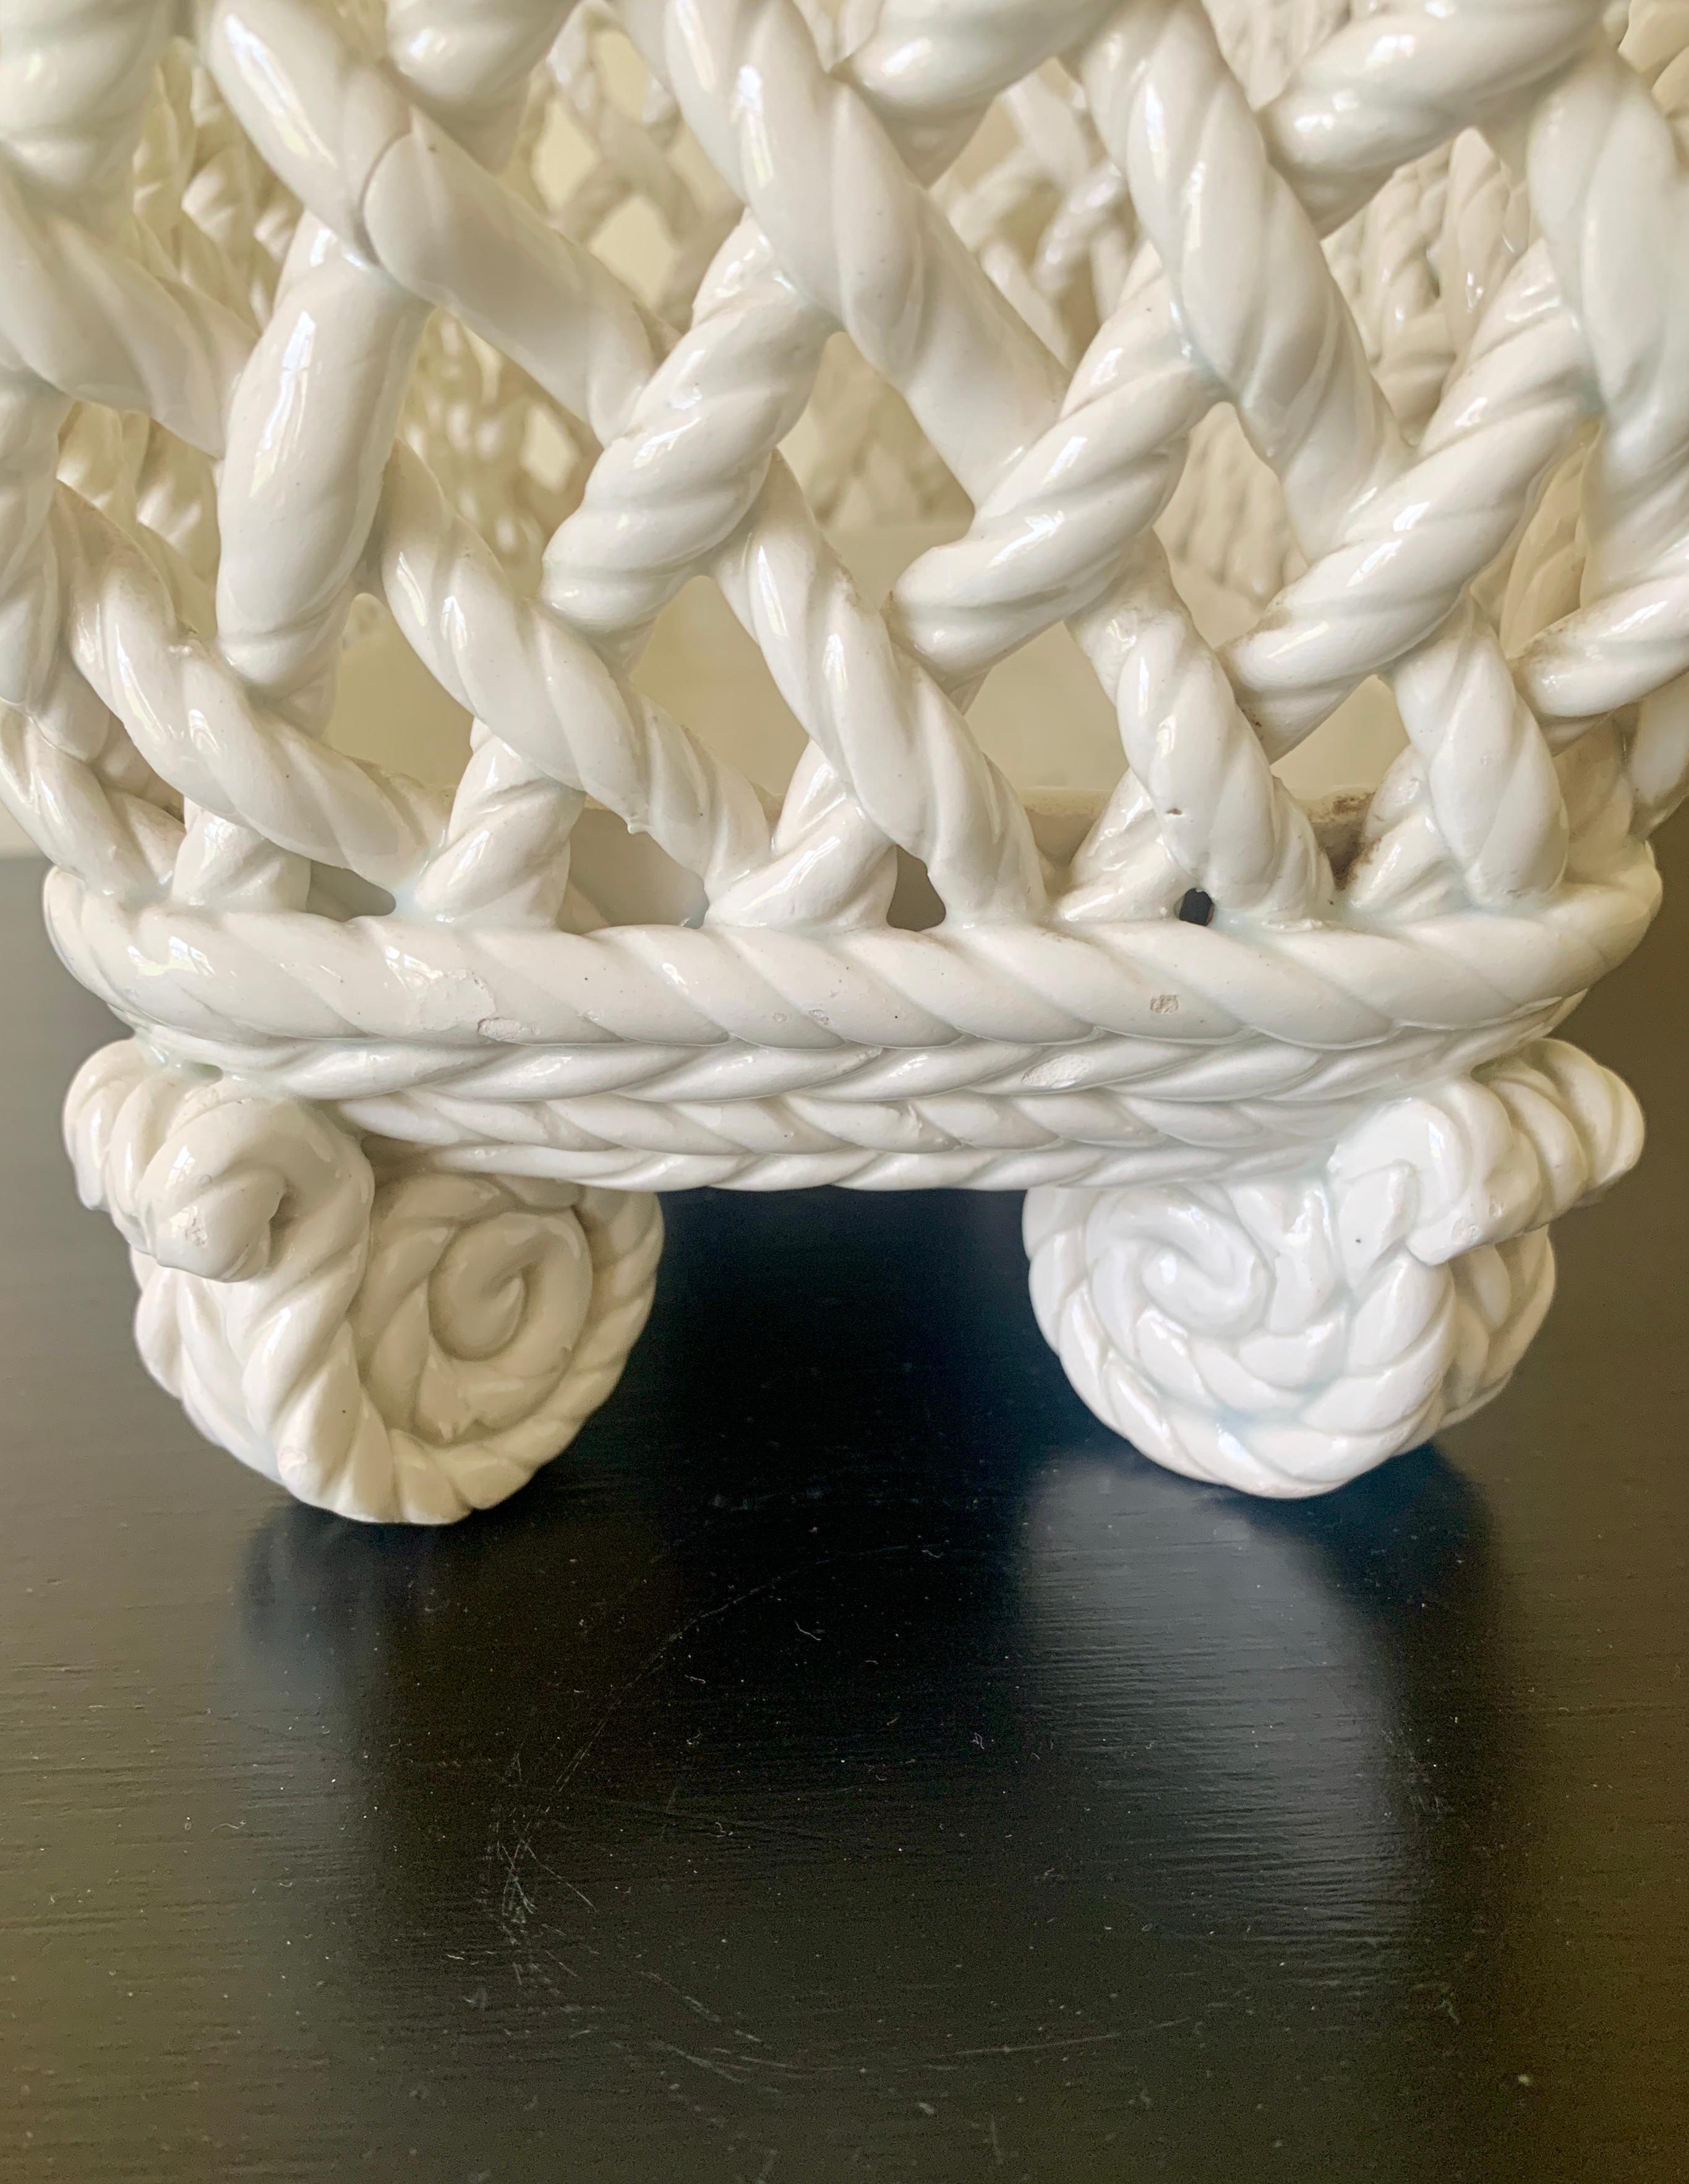 French Country White Ceramic Woven Rope Cachepot Basket For Sale 6